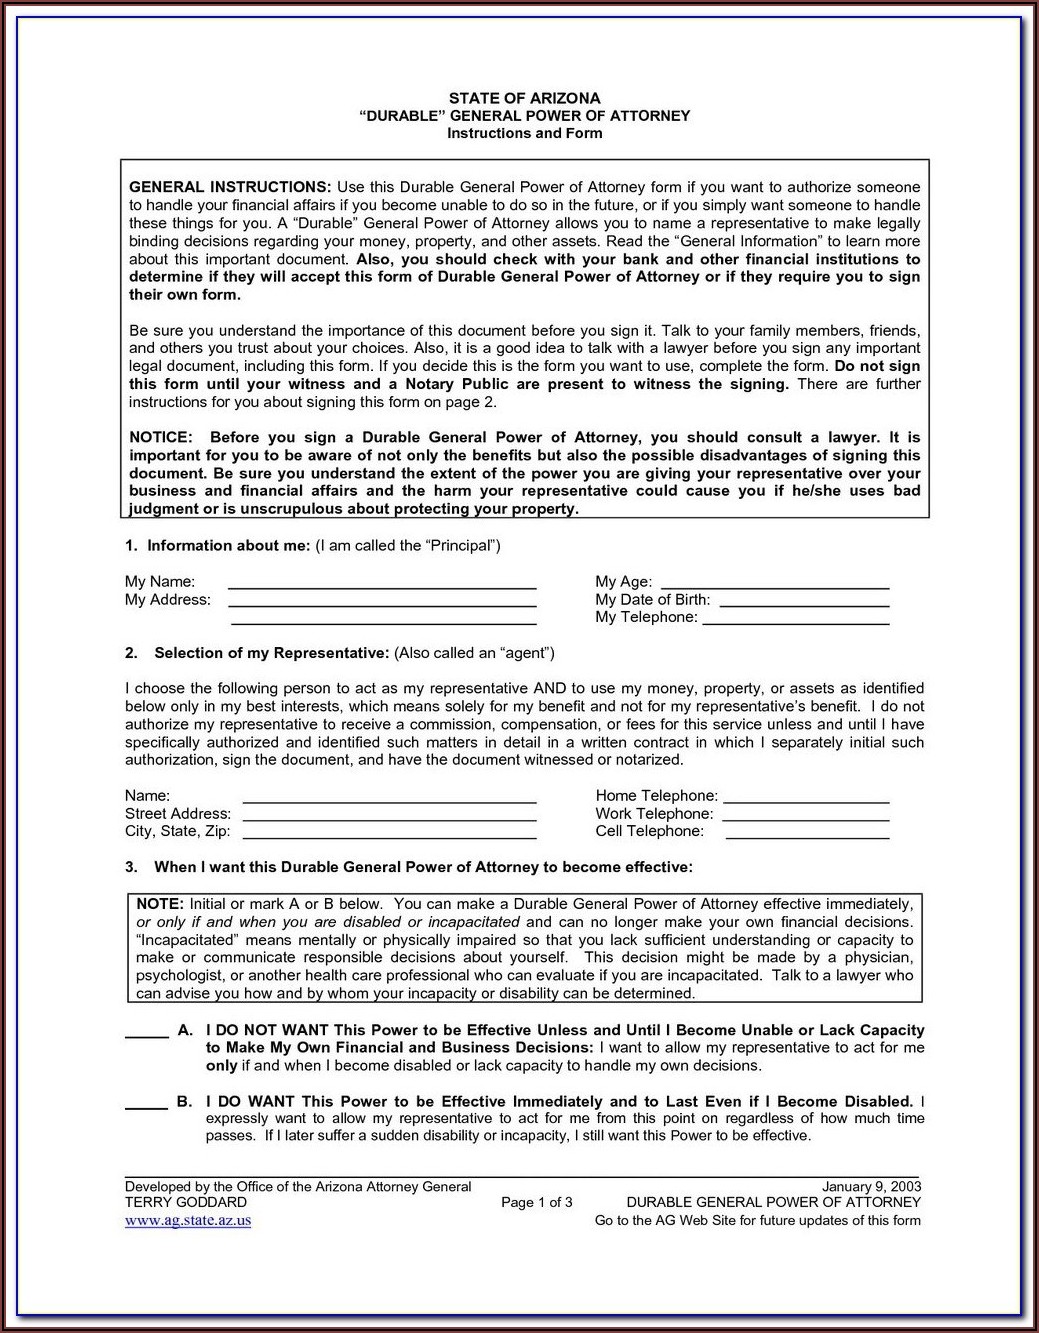 texas-medical-power-of-attorney-forms-to-print-form-resume-examples-gm9ooxen9d